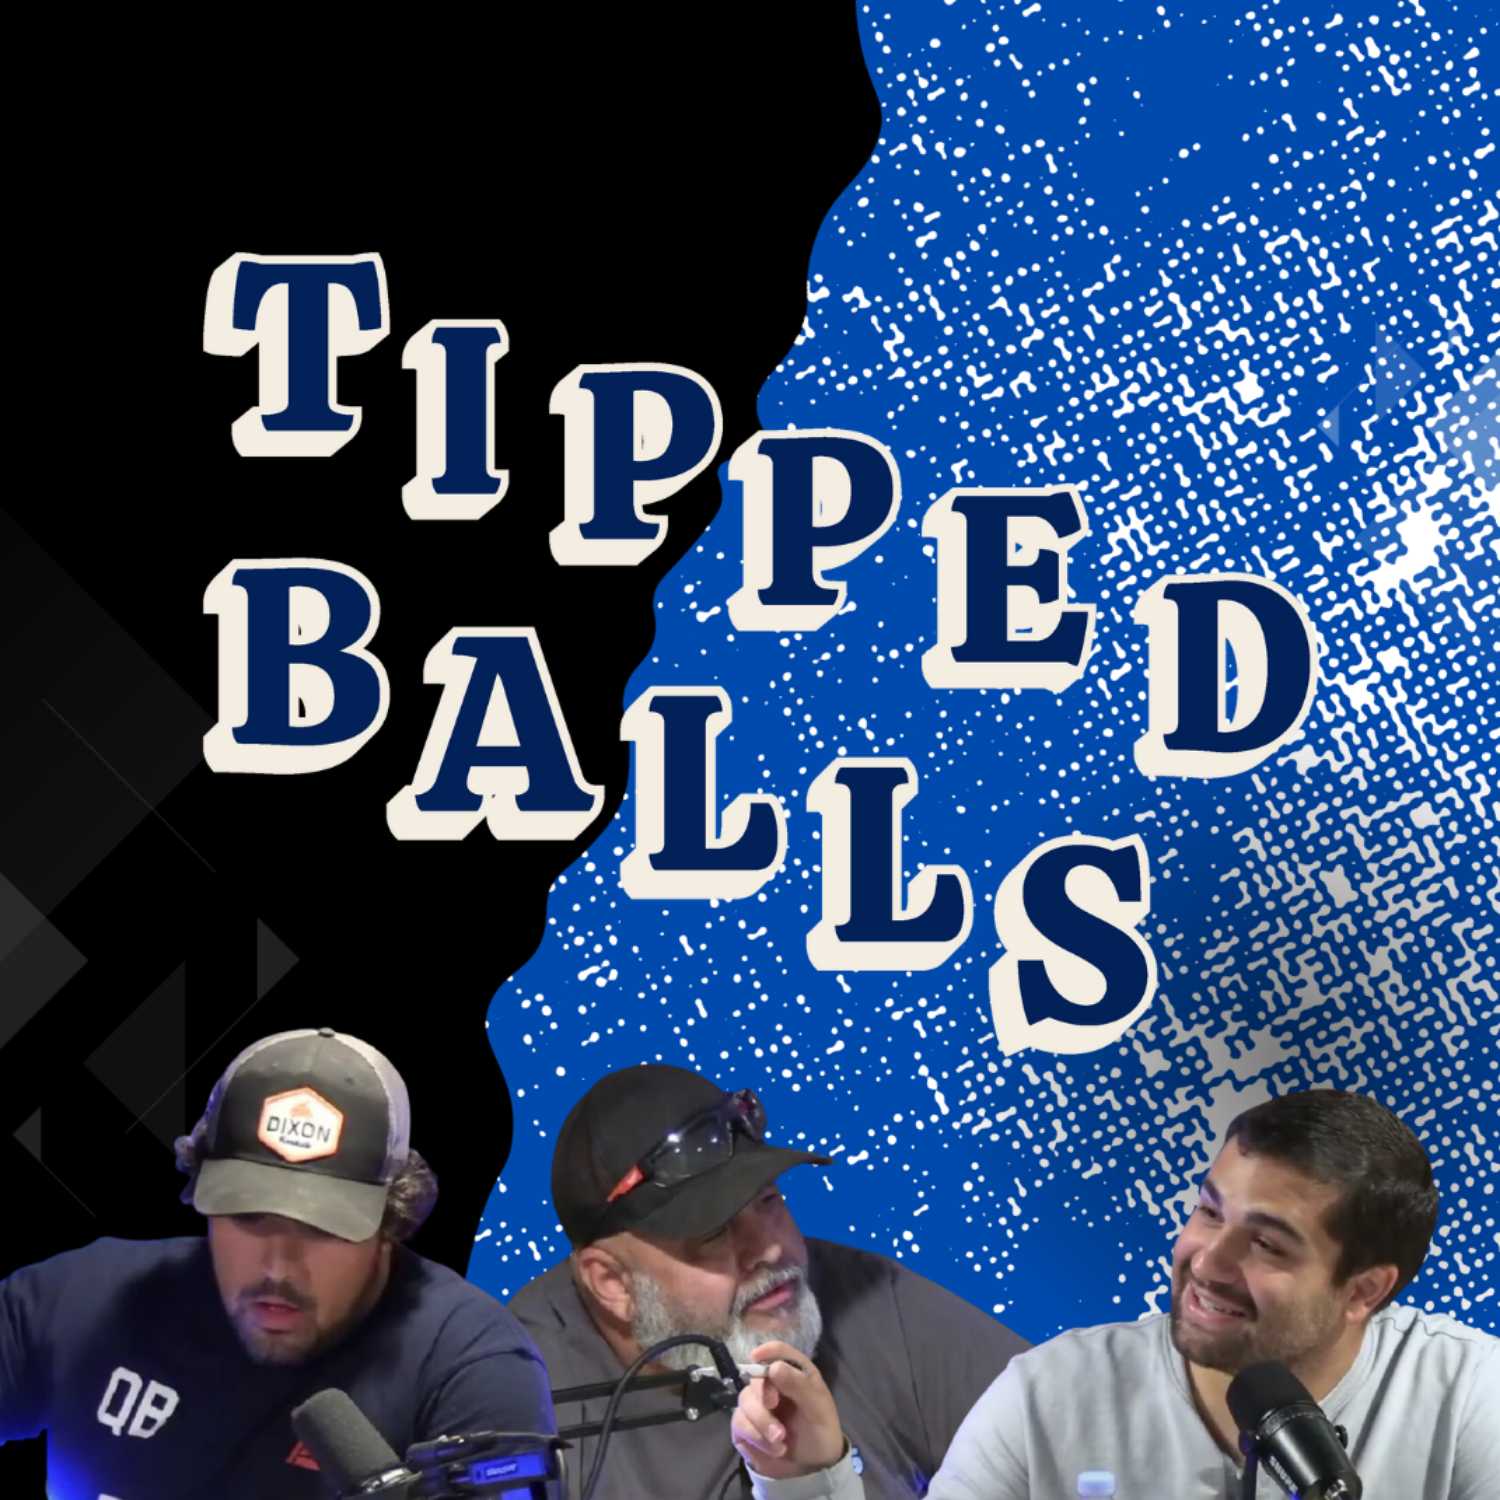 LIONS GET ROBBED :: MICHIGAN DOES THE JOB :: TIPPED BALLS IS BACK